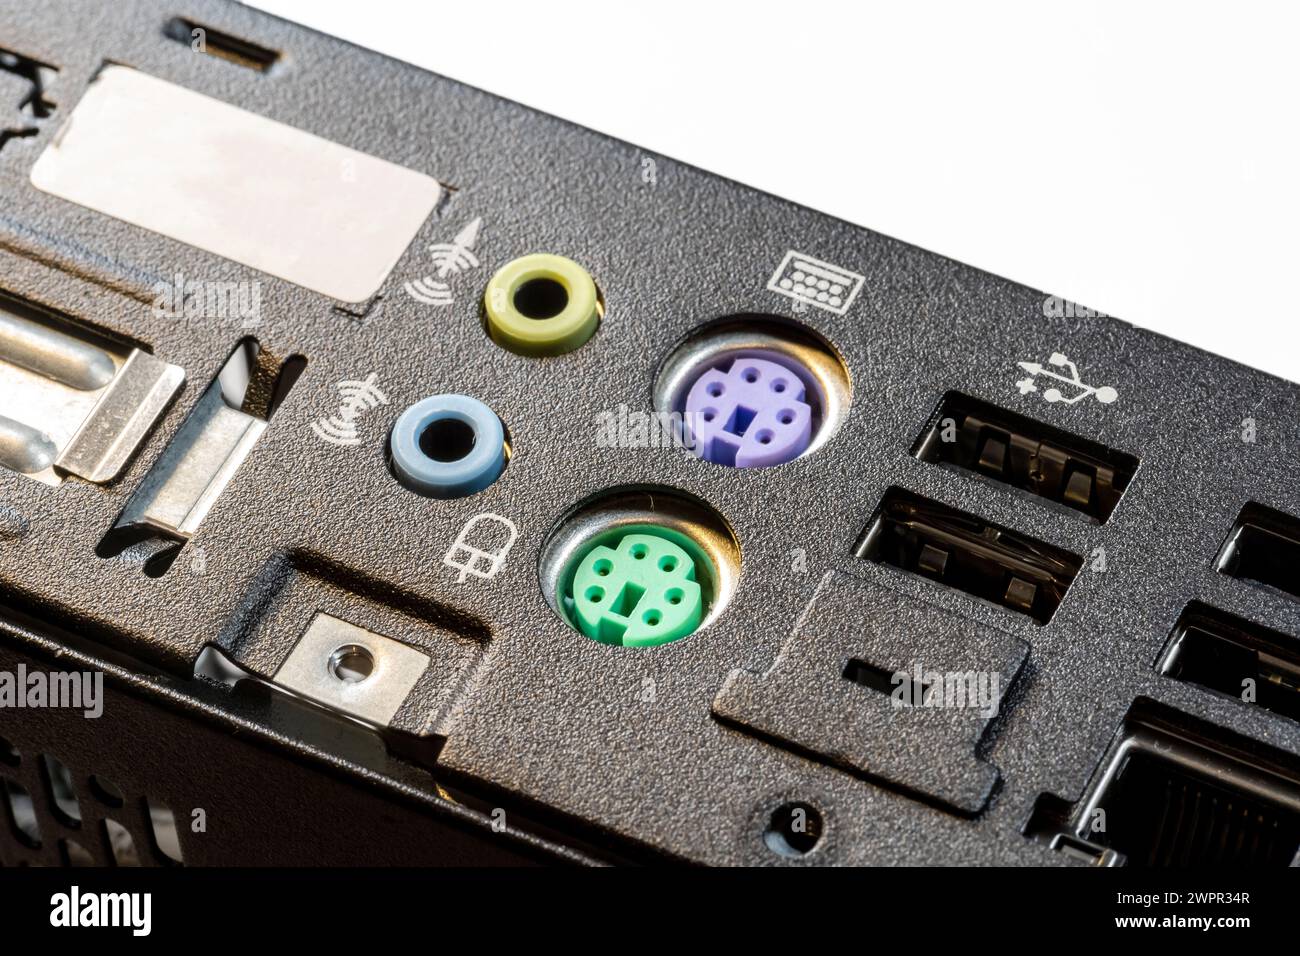 Close-up view of a computer motherboard featuring old obsolete no longer used PS 2 ports for keyboard and mouse along with USB connections old technol Stock Photo